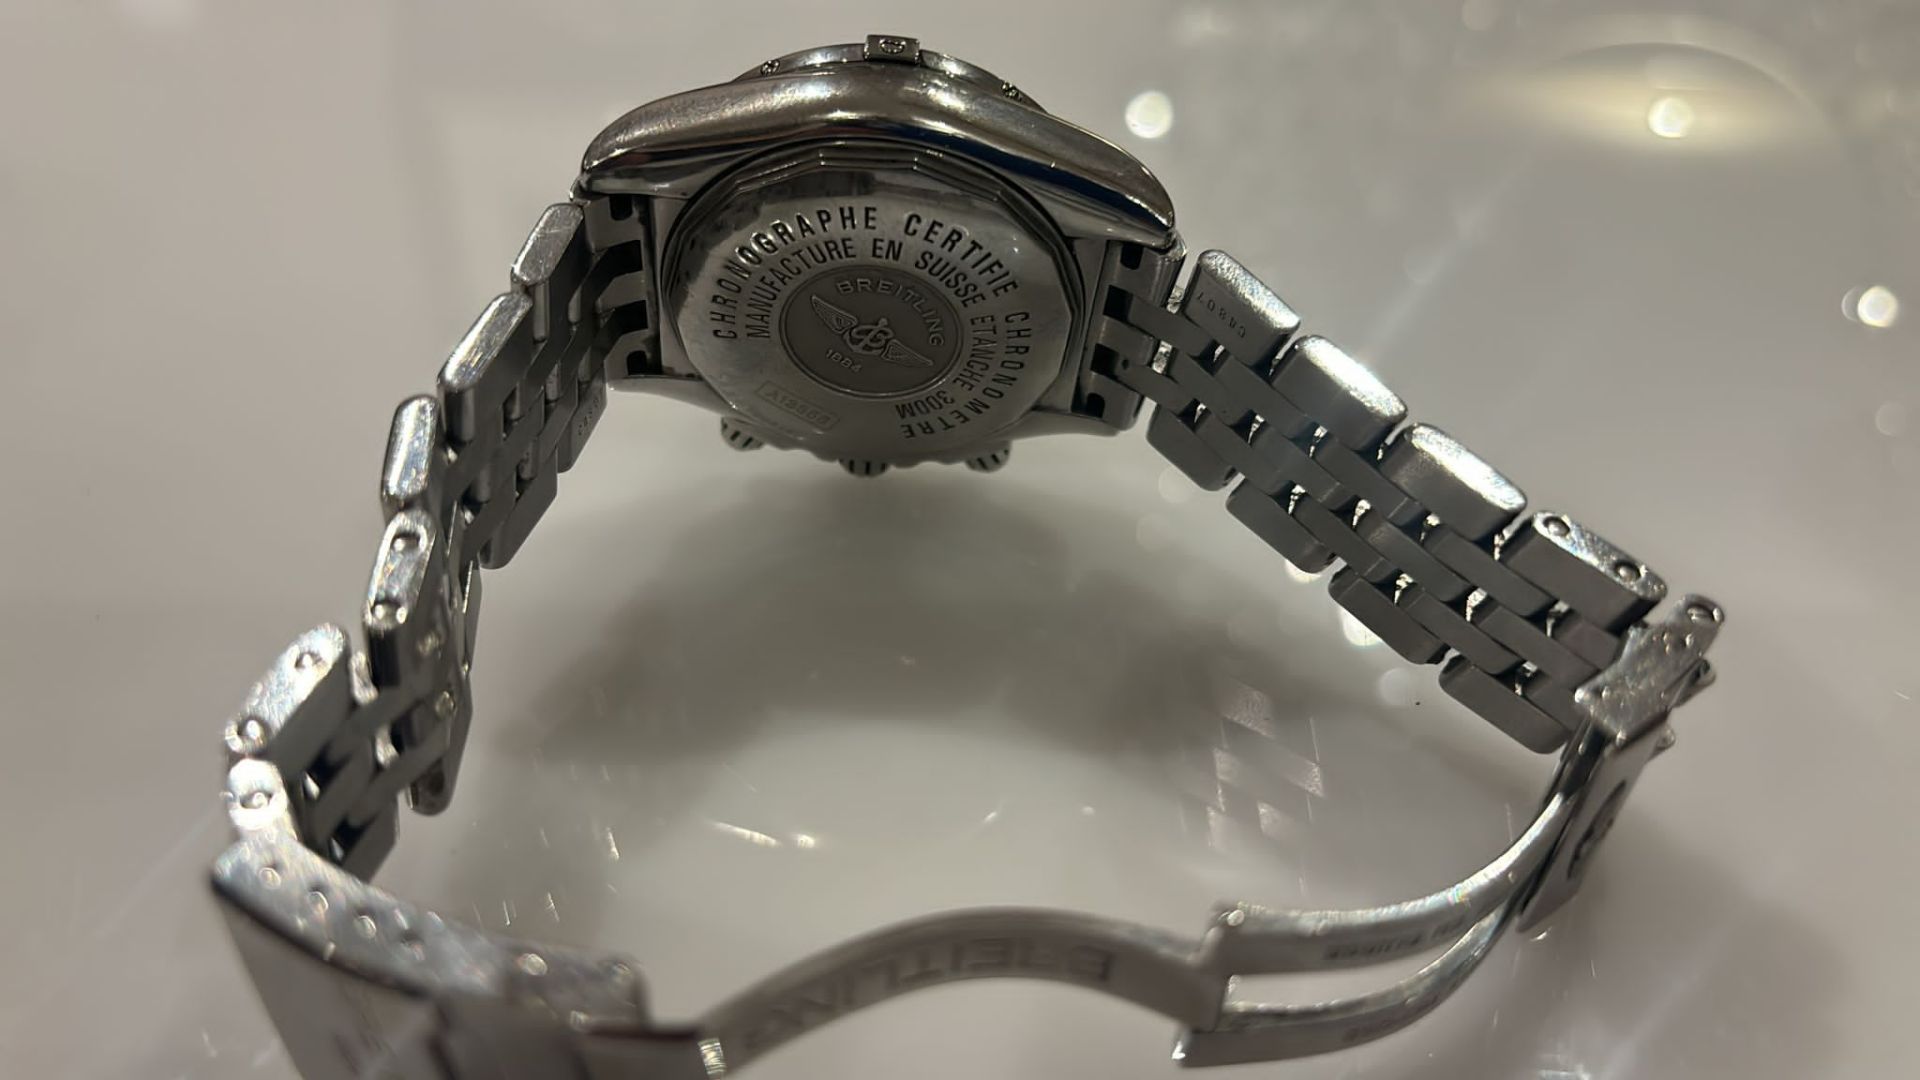 Breitling Chronomat Evolution A13356 Watch - Image 11 of 12